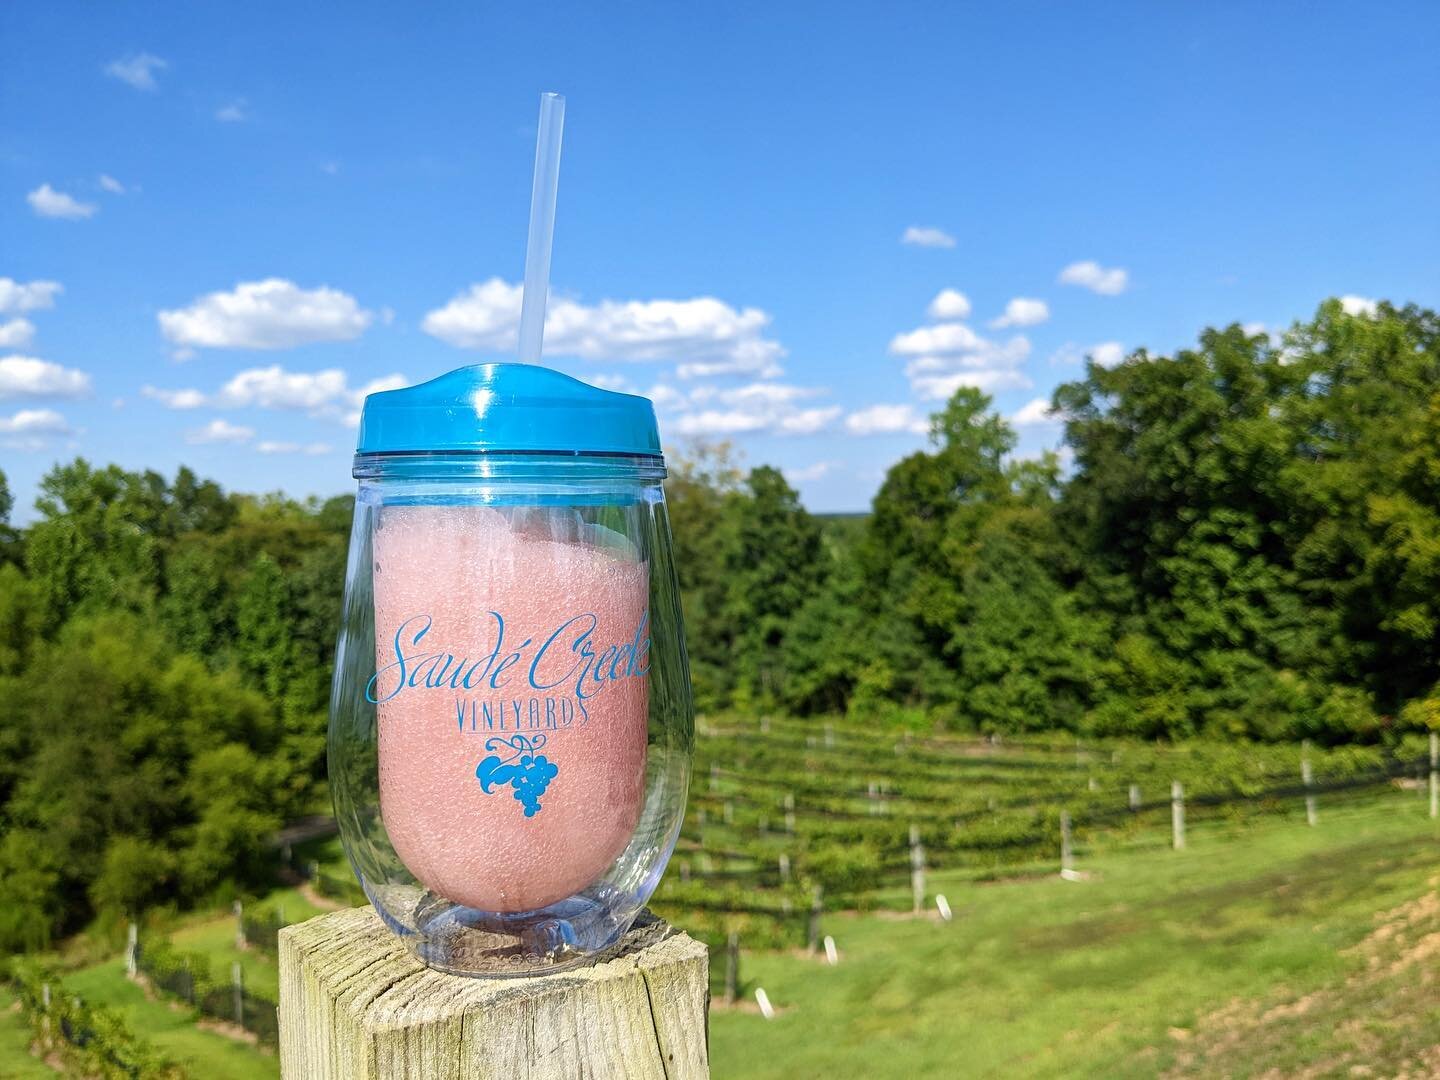 ✨ Enjoy your wine slushie with a view!

Today&rsquo;s lineup:
&bull; Winery hours 11am-6pm
&bull; Back to school Teacher discount 🍎
&bull; Last weekend of slushies!
&bull; @thescottishpig1 food truck 11am-5pm
&bull; Live music by @galenhamiltonmusic